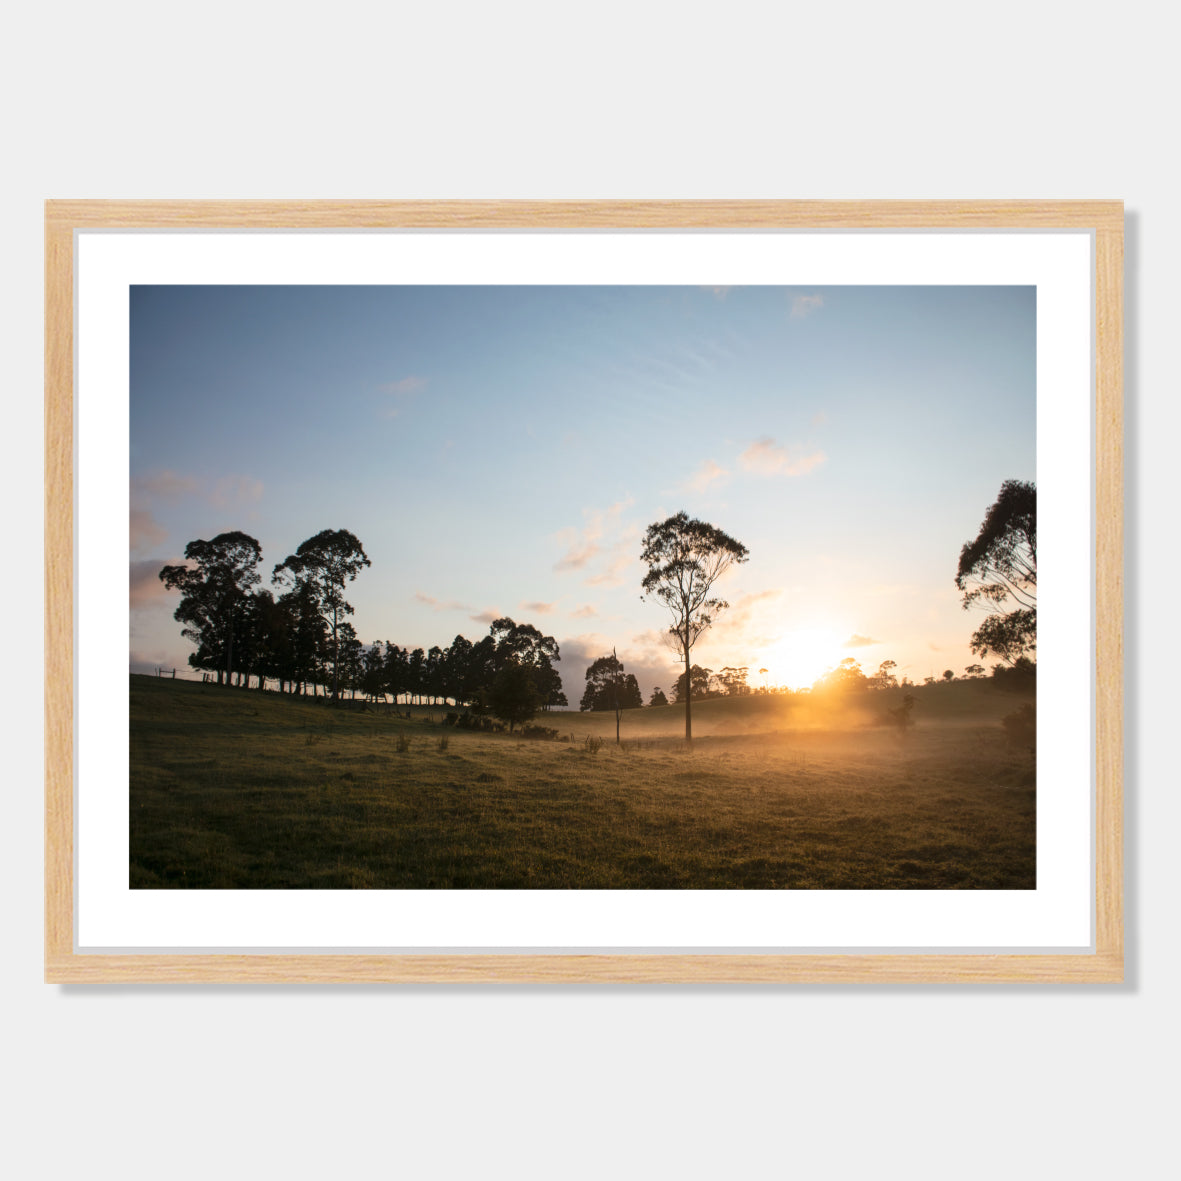 Photographic art print of sunrise in Northland, New Zealand by Chris Starkey. Printed in New Zealand by endemicworld framed in raw oak.